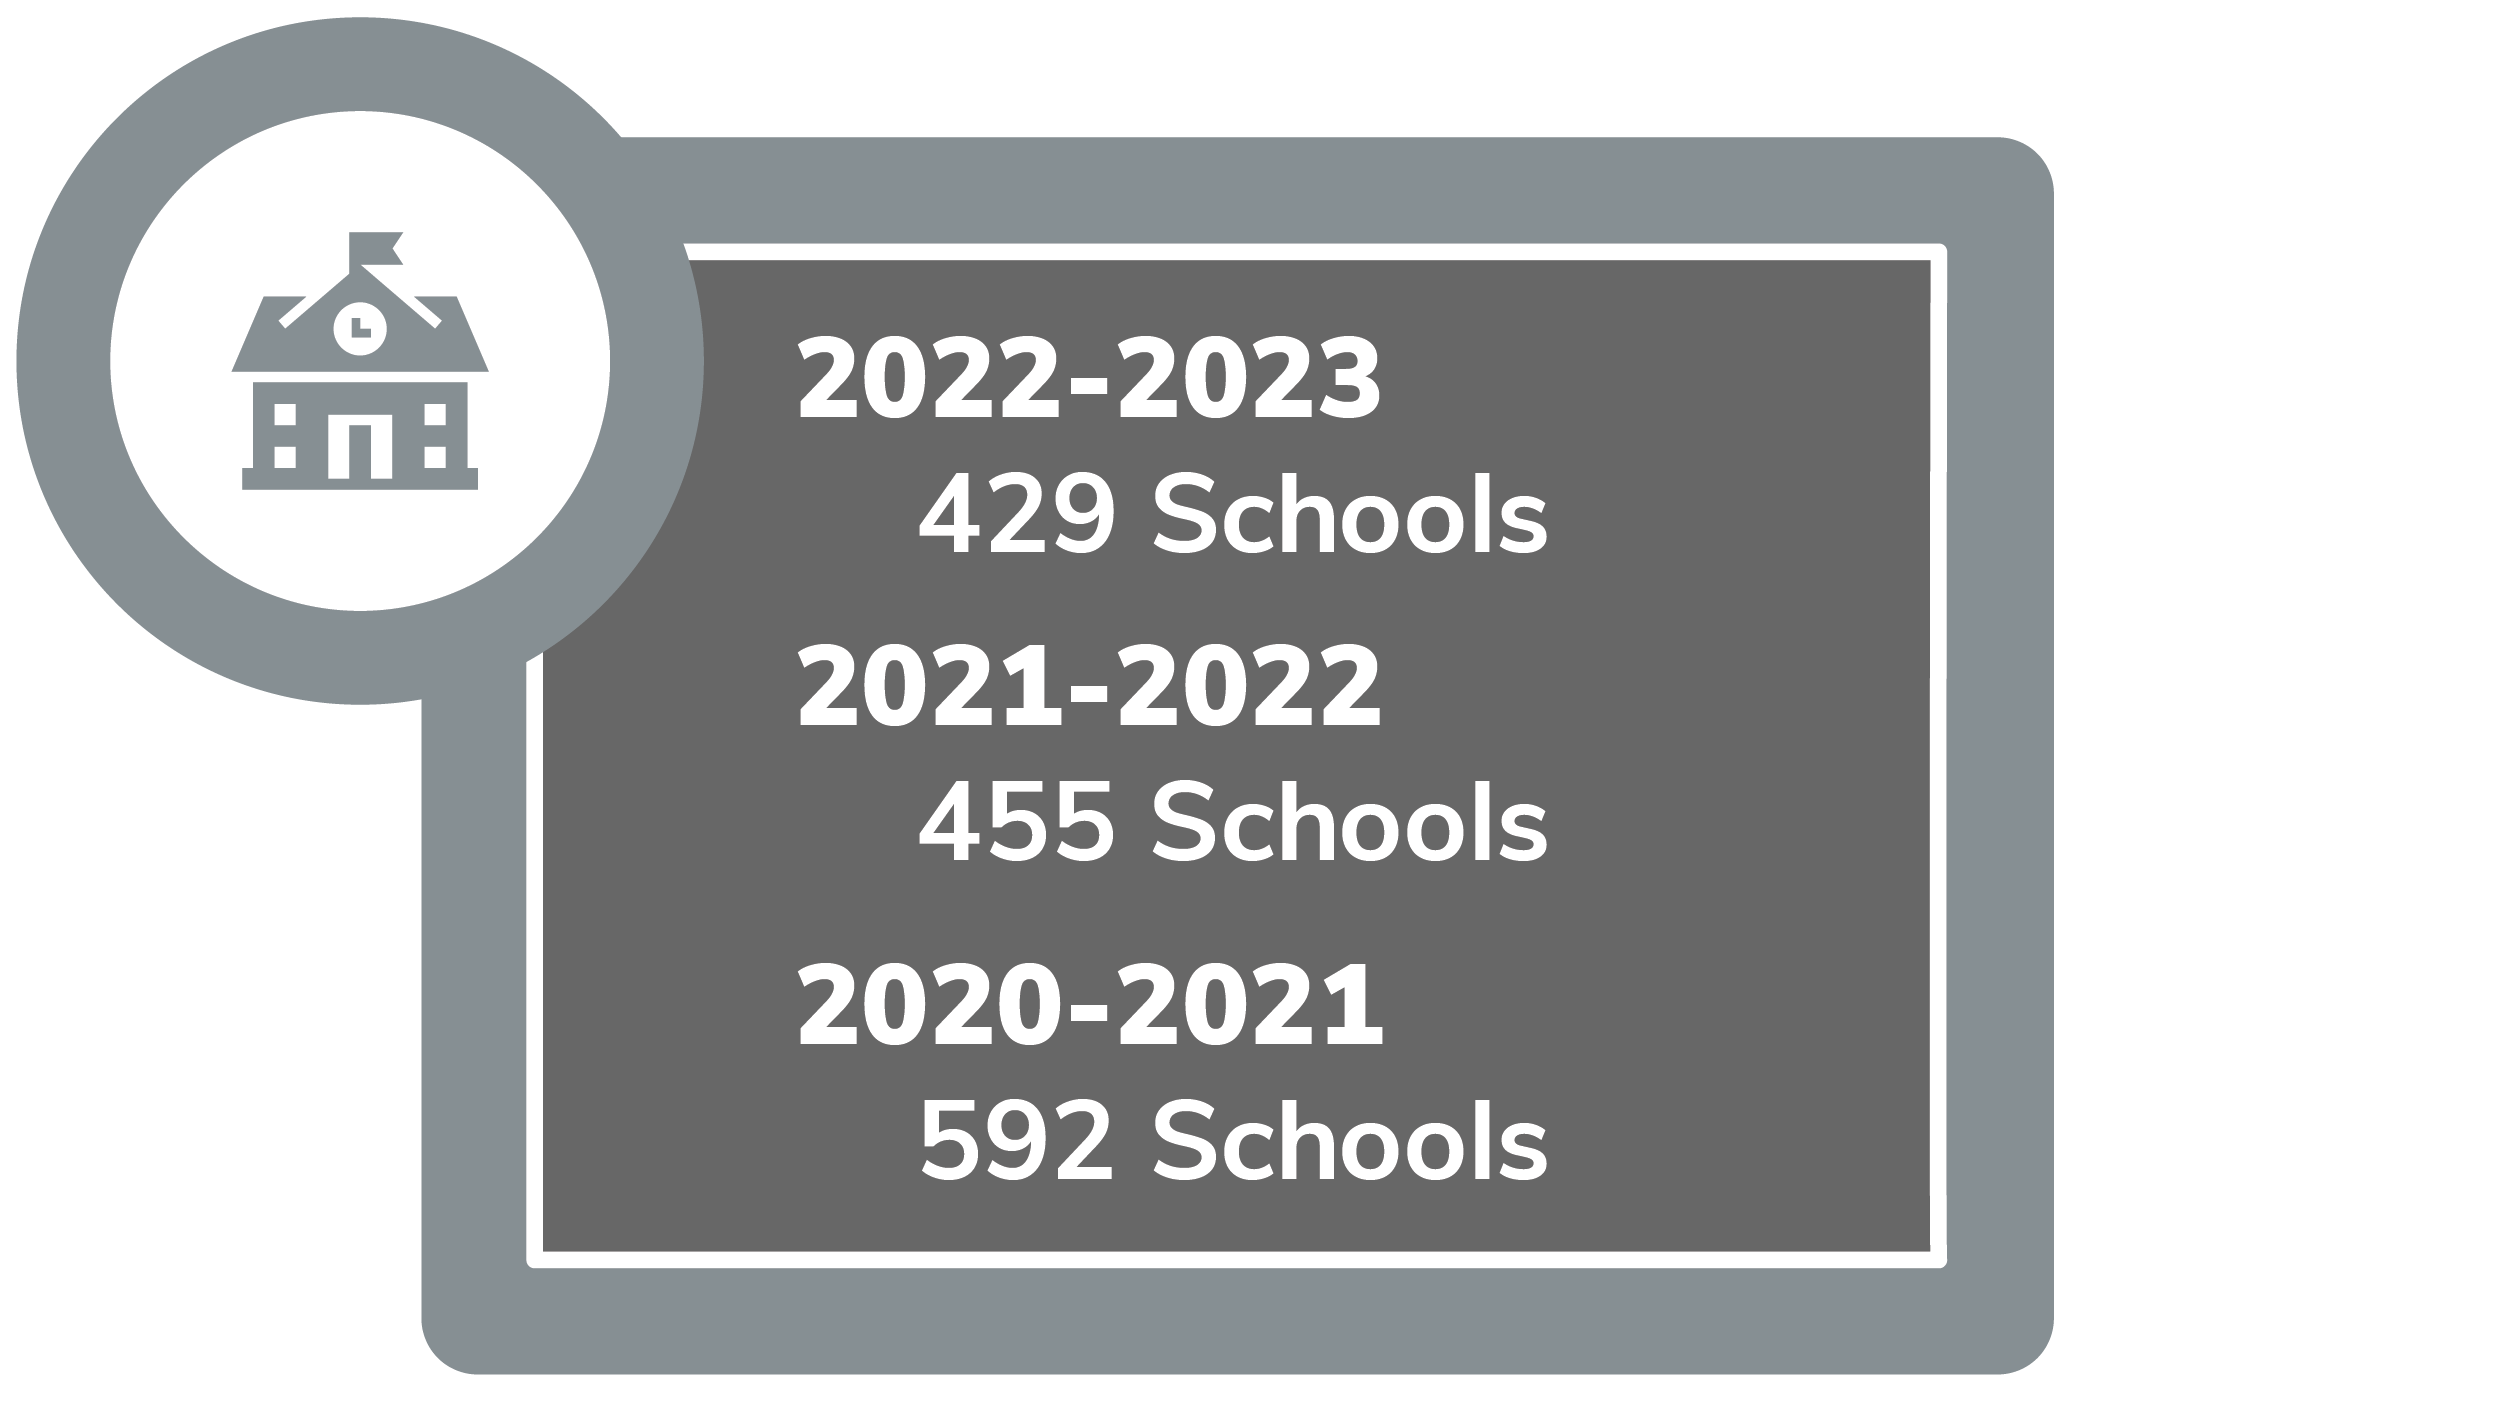 2022-2023 there were 429 schools